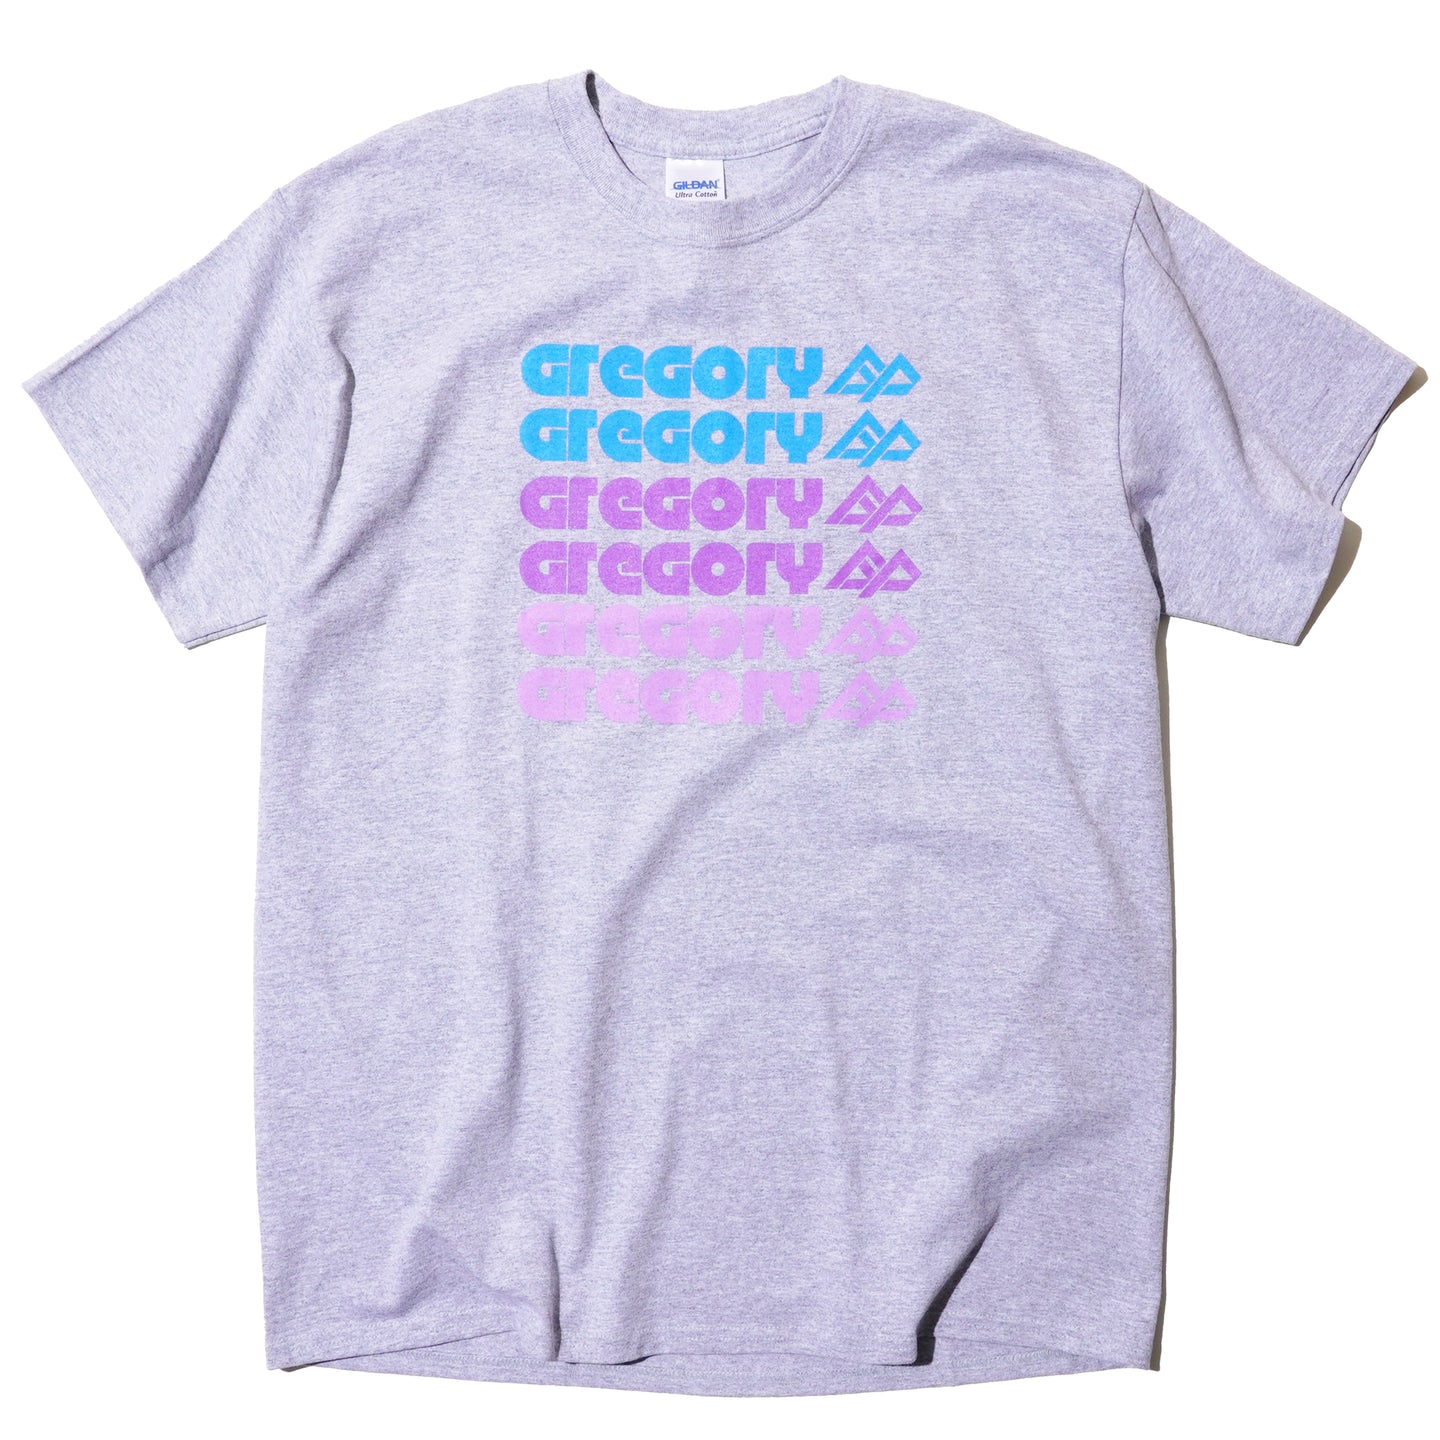 GREGORY TYPOGRAPHY T-SHIRT (GREY)